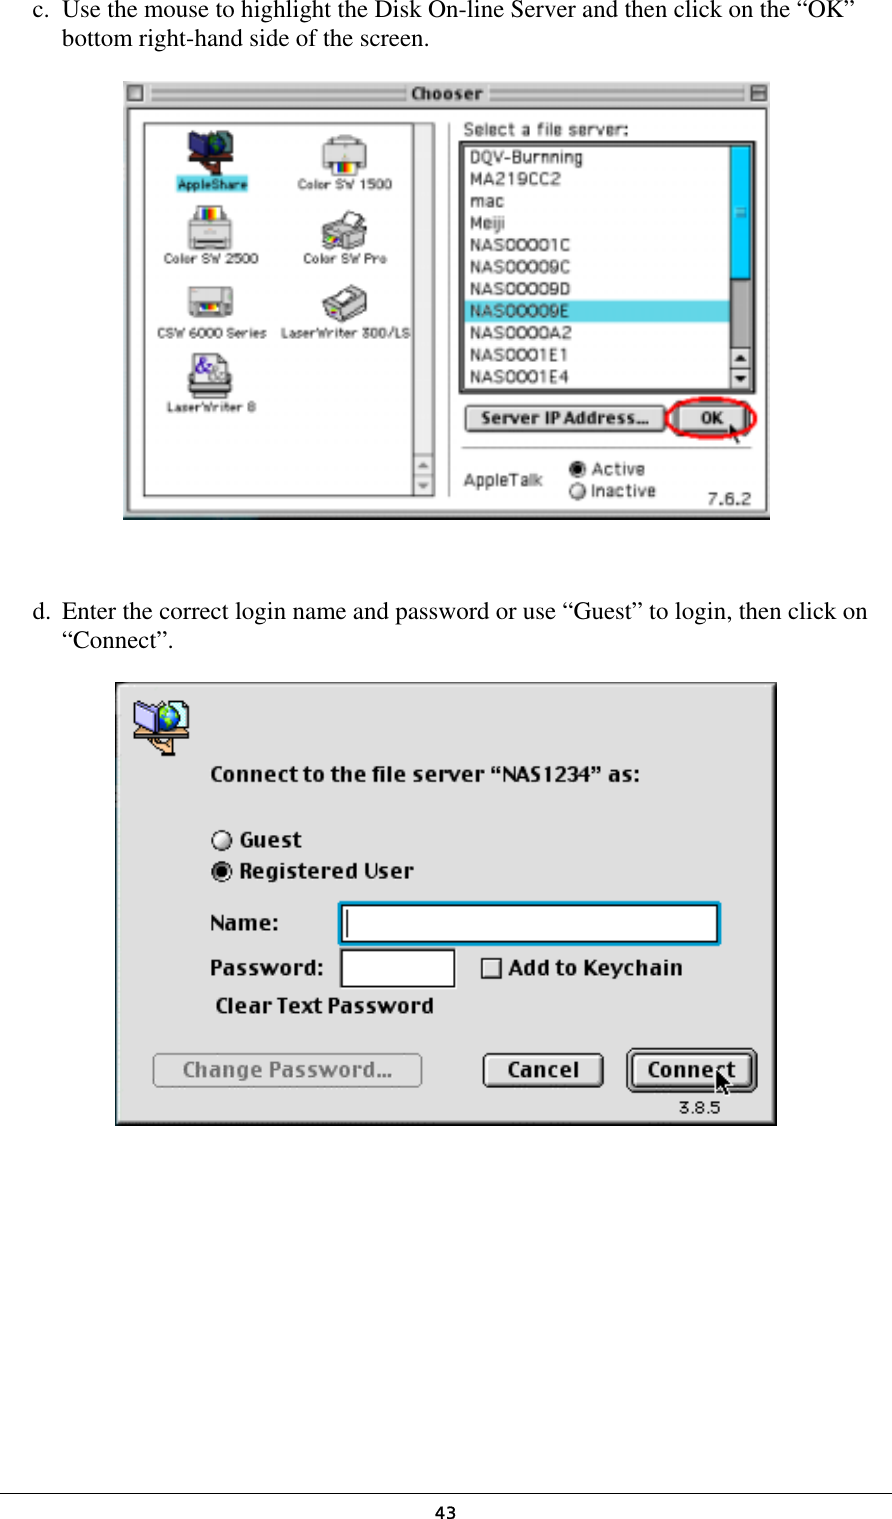   43c.  Use the mouse to highlight the Disk On-line Server and then click on the “OK”  bottom right-hand side of the screen.       d.  Enter the correct login name and password or use “Guest” to login, then click on “Connect”.        